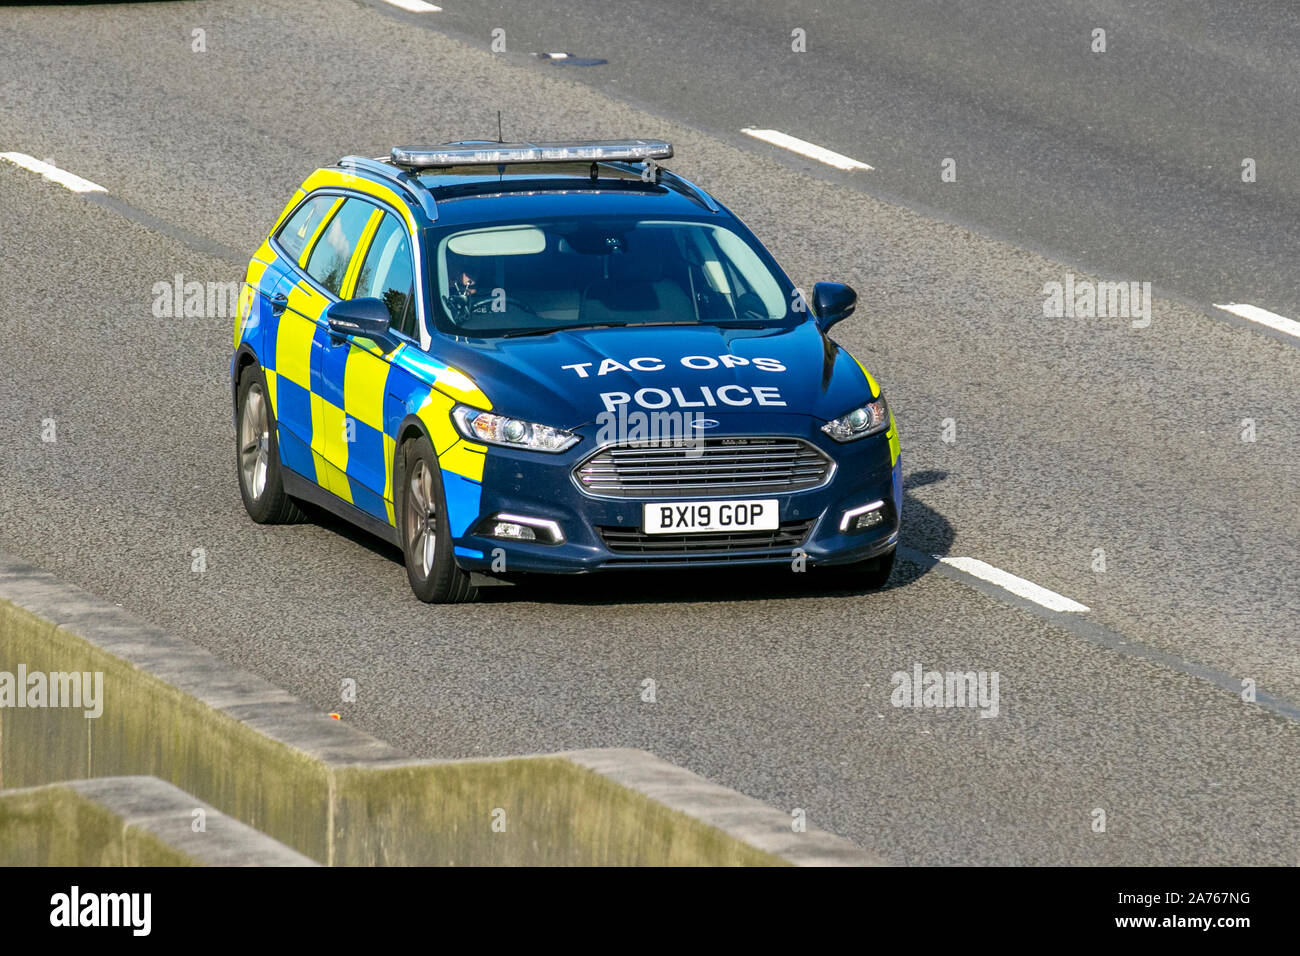 Ford Mondeo Zetec Edition TDCI Police Emergency vehicle; UK Vehicular traffic, transport, modern vehicles, saloon cars, south-bound on the 3 lane M6 motorway highway. Stock Photo